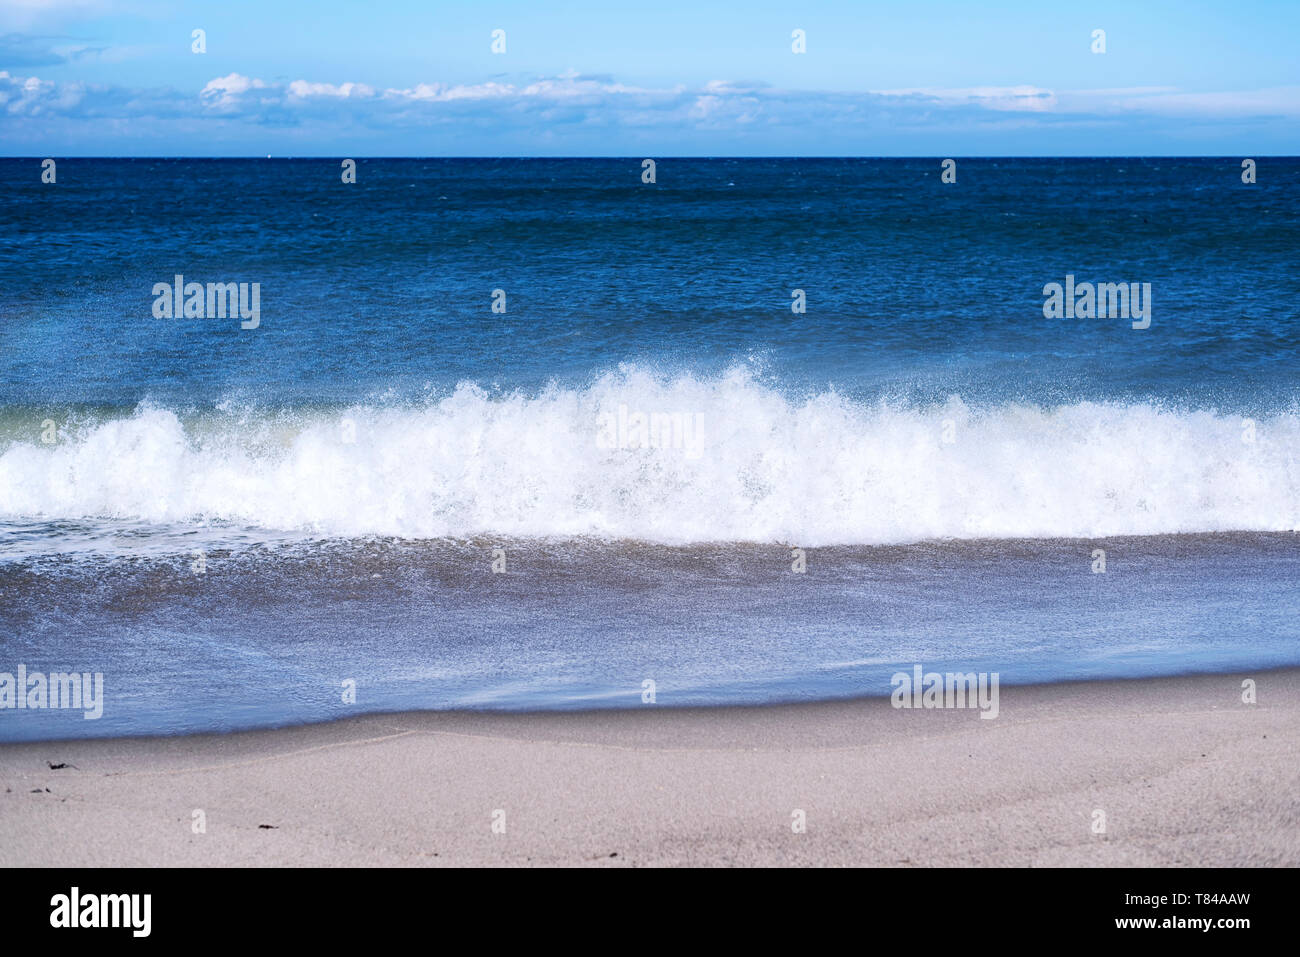 Waves from the Atlantic Ocean crashing onto the beaches of the Cape Cod National Seashore in Truro Massachusetts on a sunny blue sky day. Stock Photo